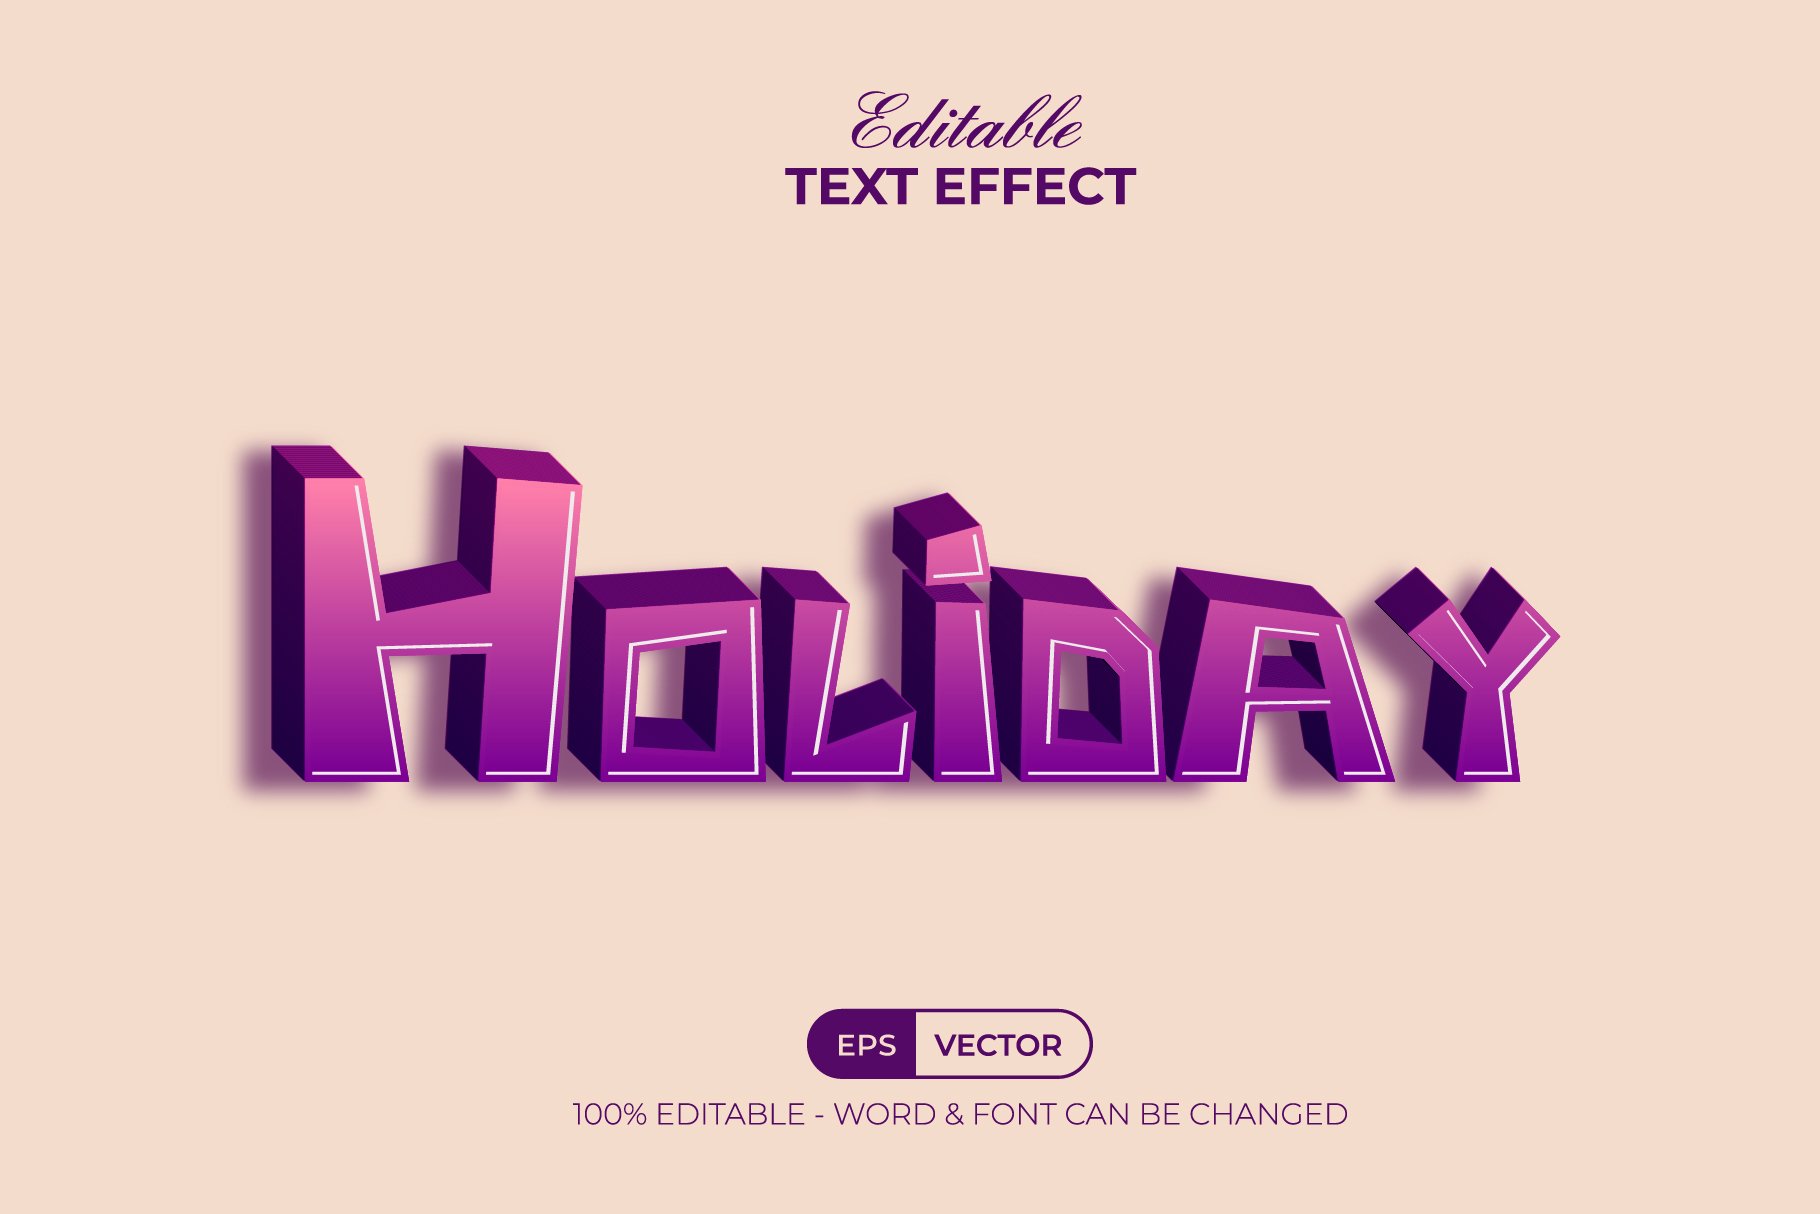 3D text effect cartoon stylepreview image.